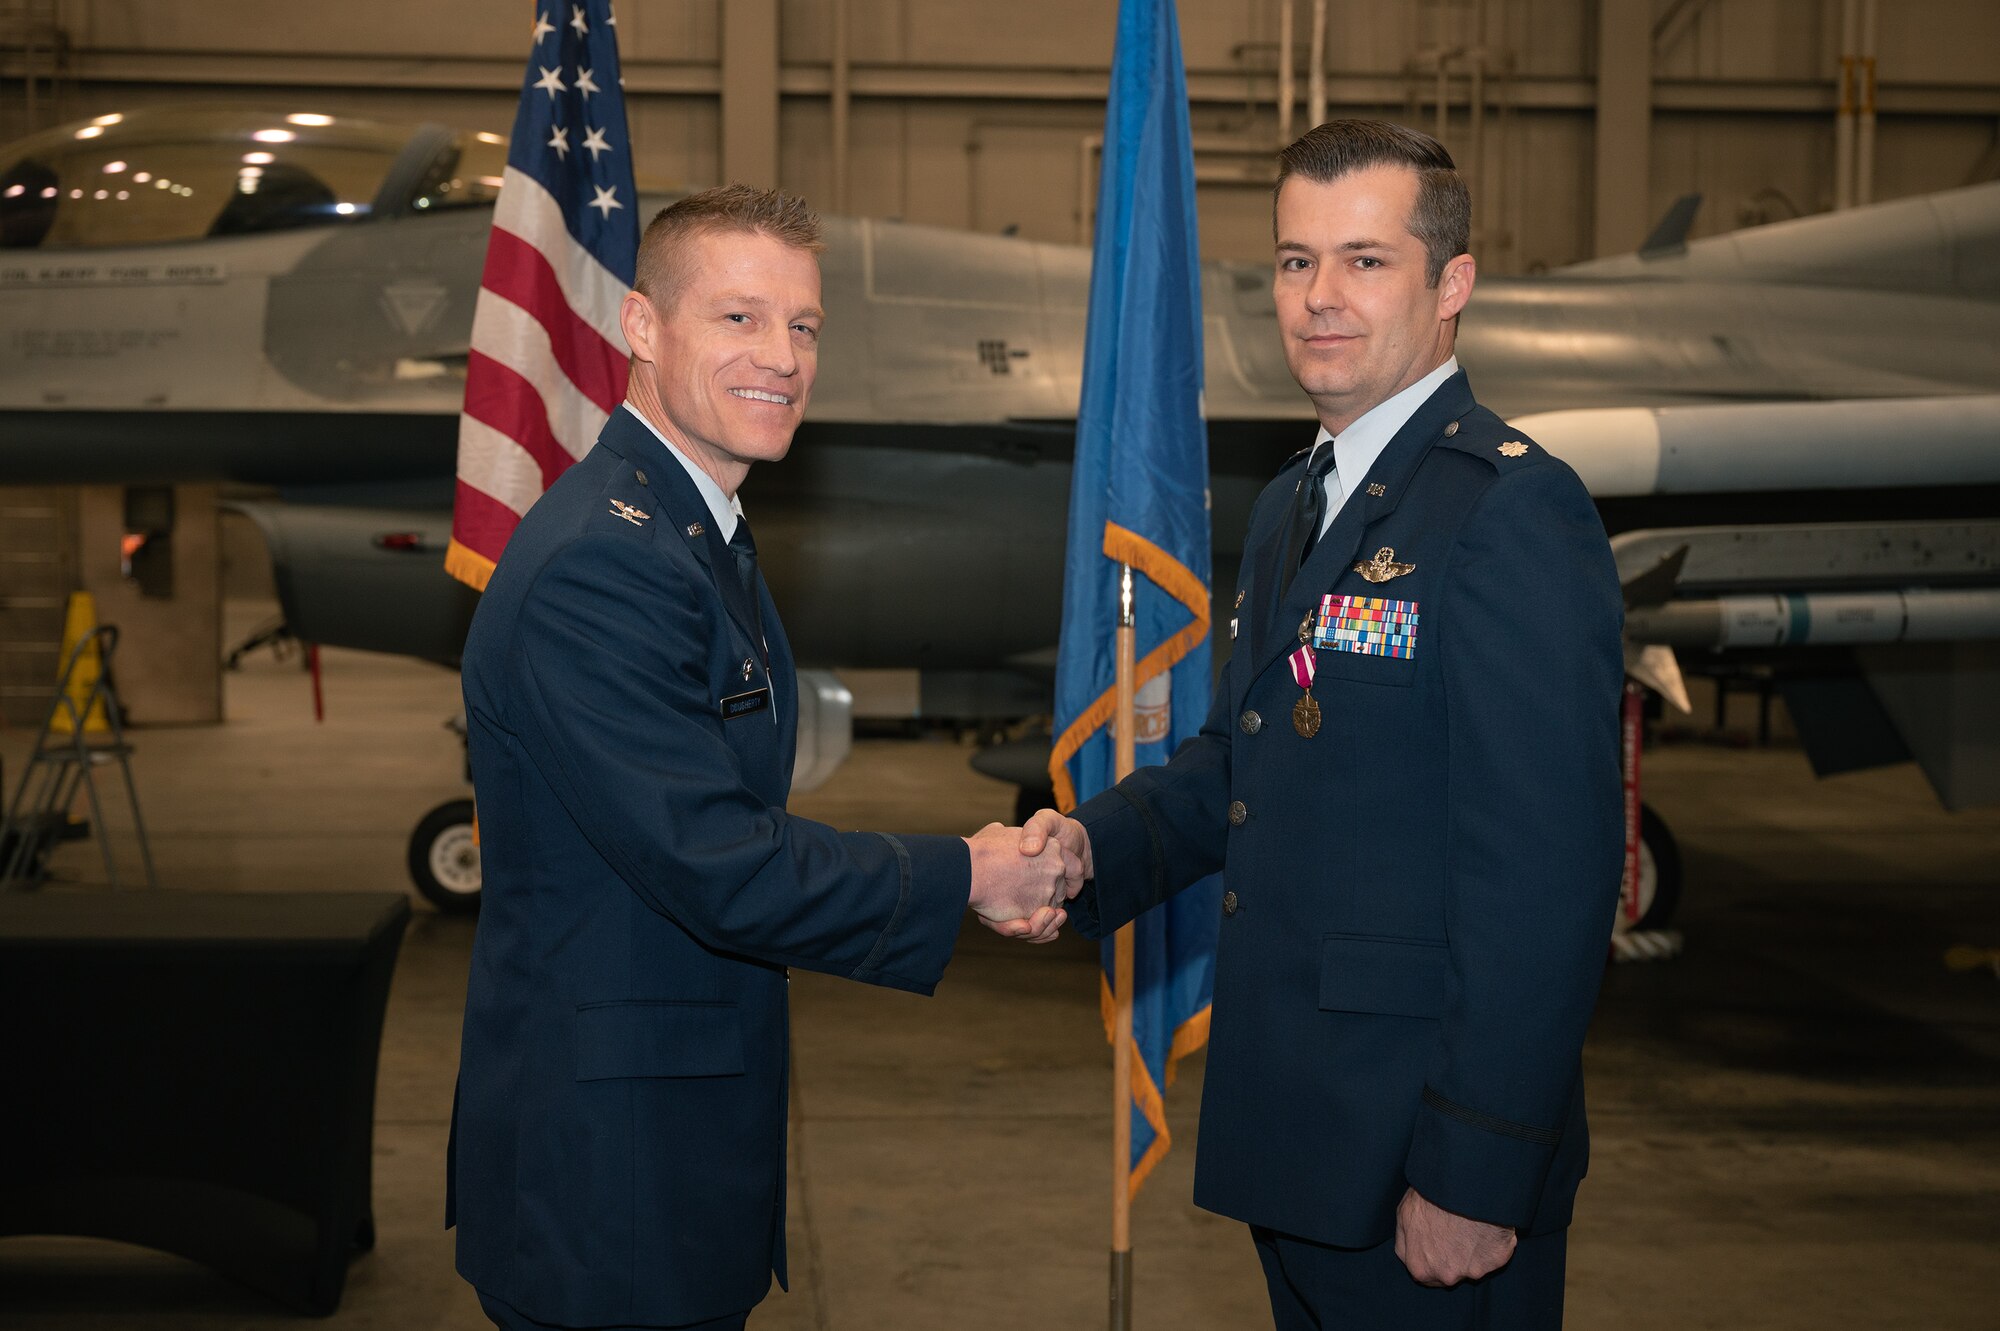 A squadron commander earns the Meritorious Service Medal.